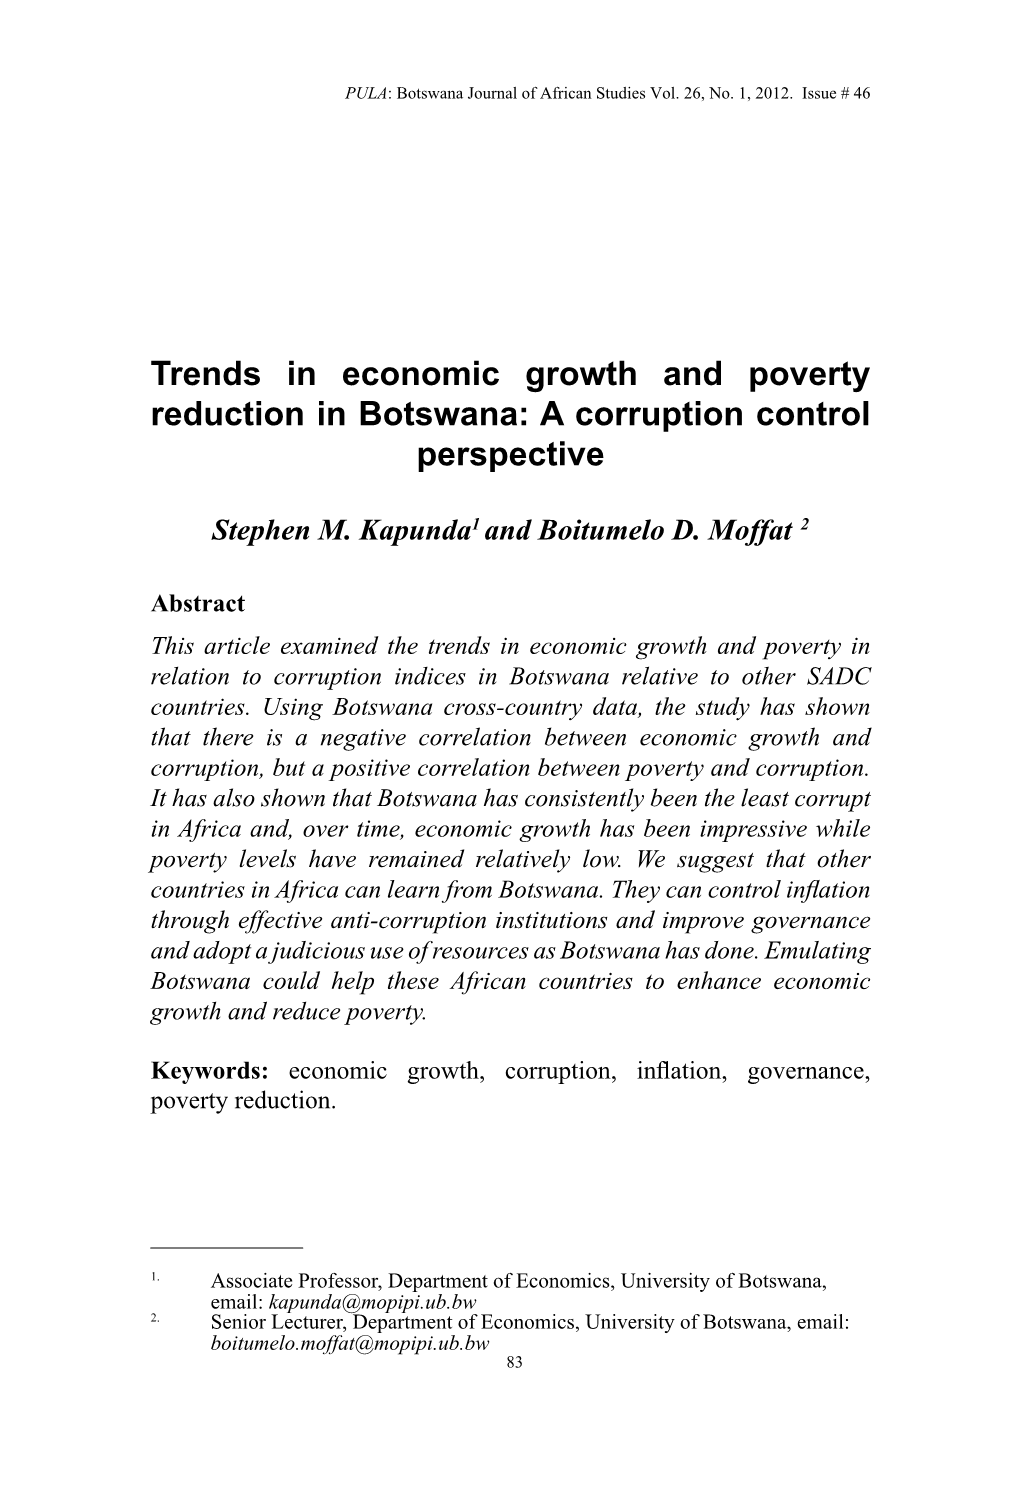 Trends in Economic Growth and Poverty Reduction in Botswana: a Corruption Control Perspective